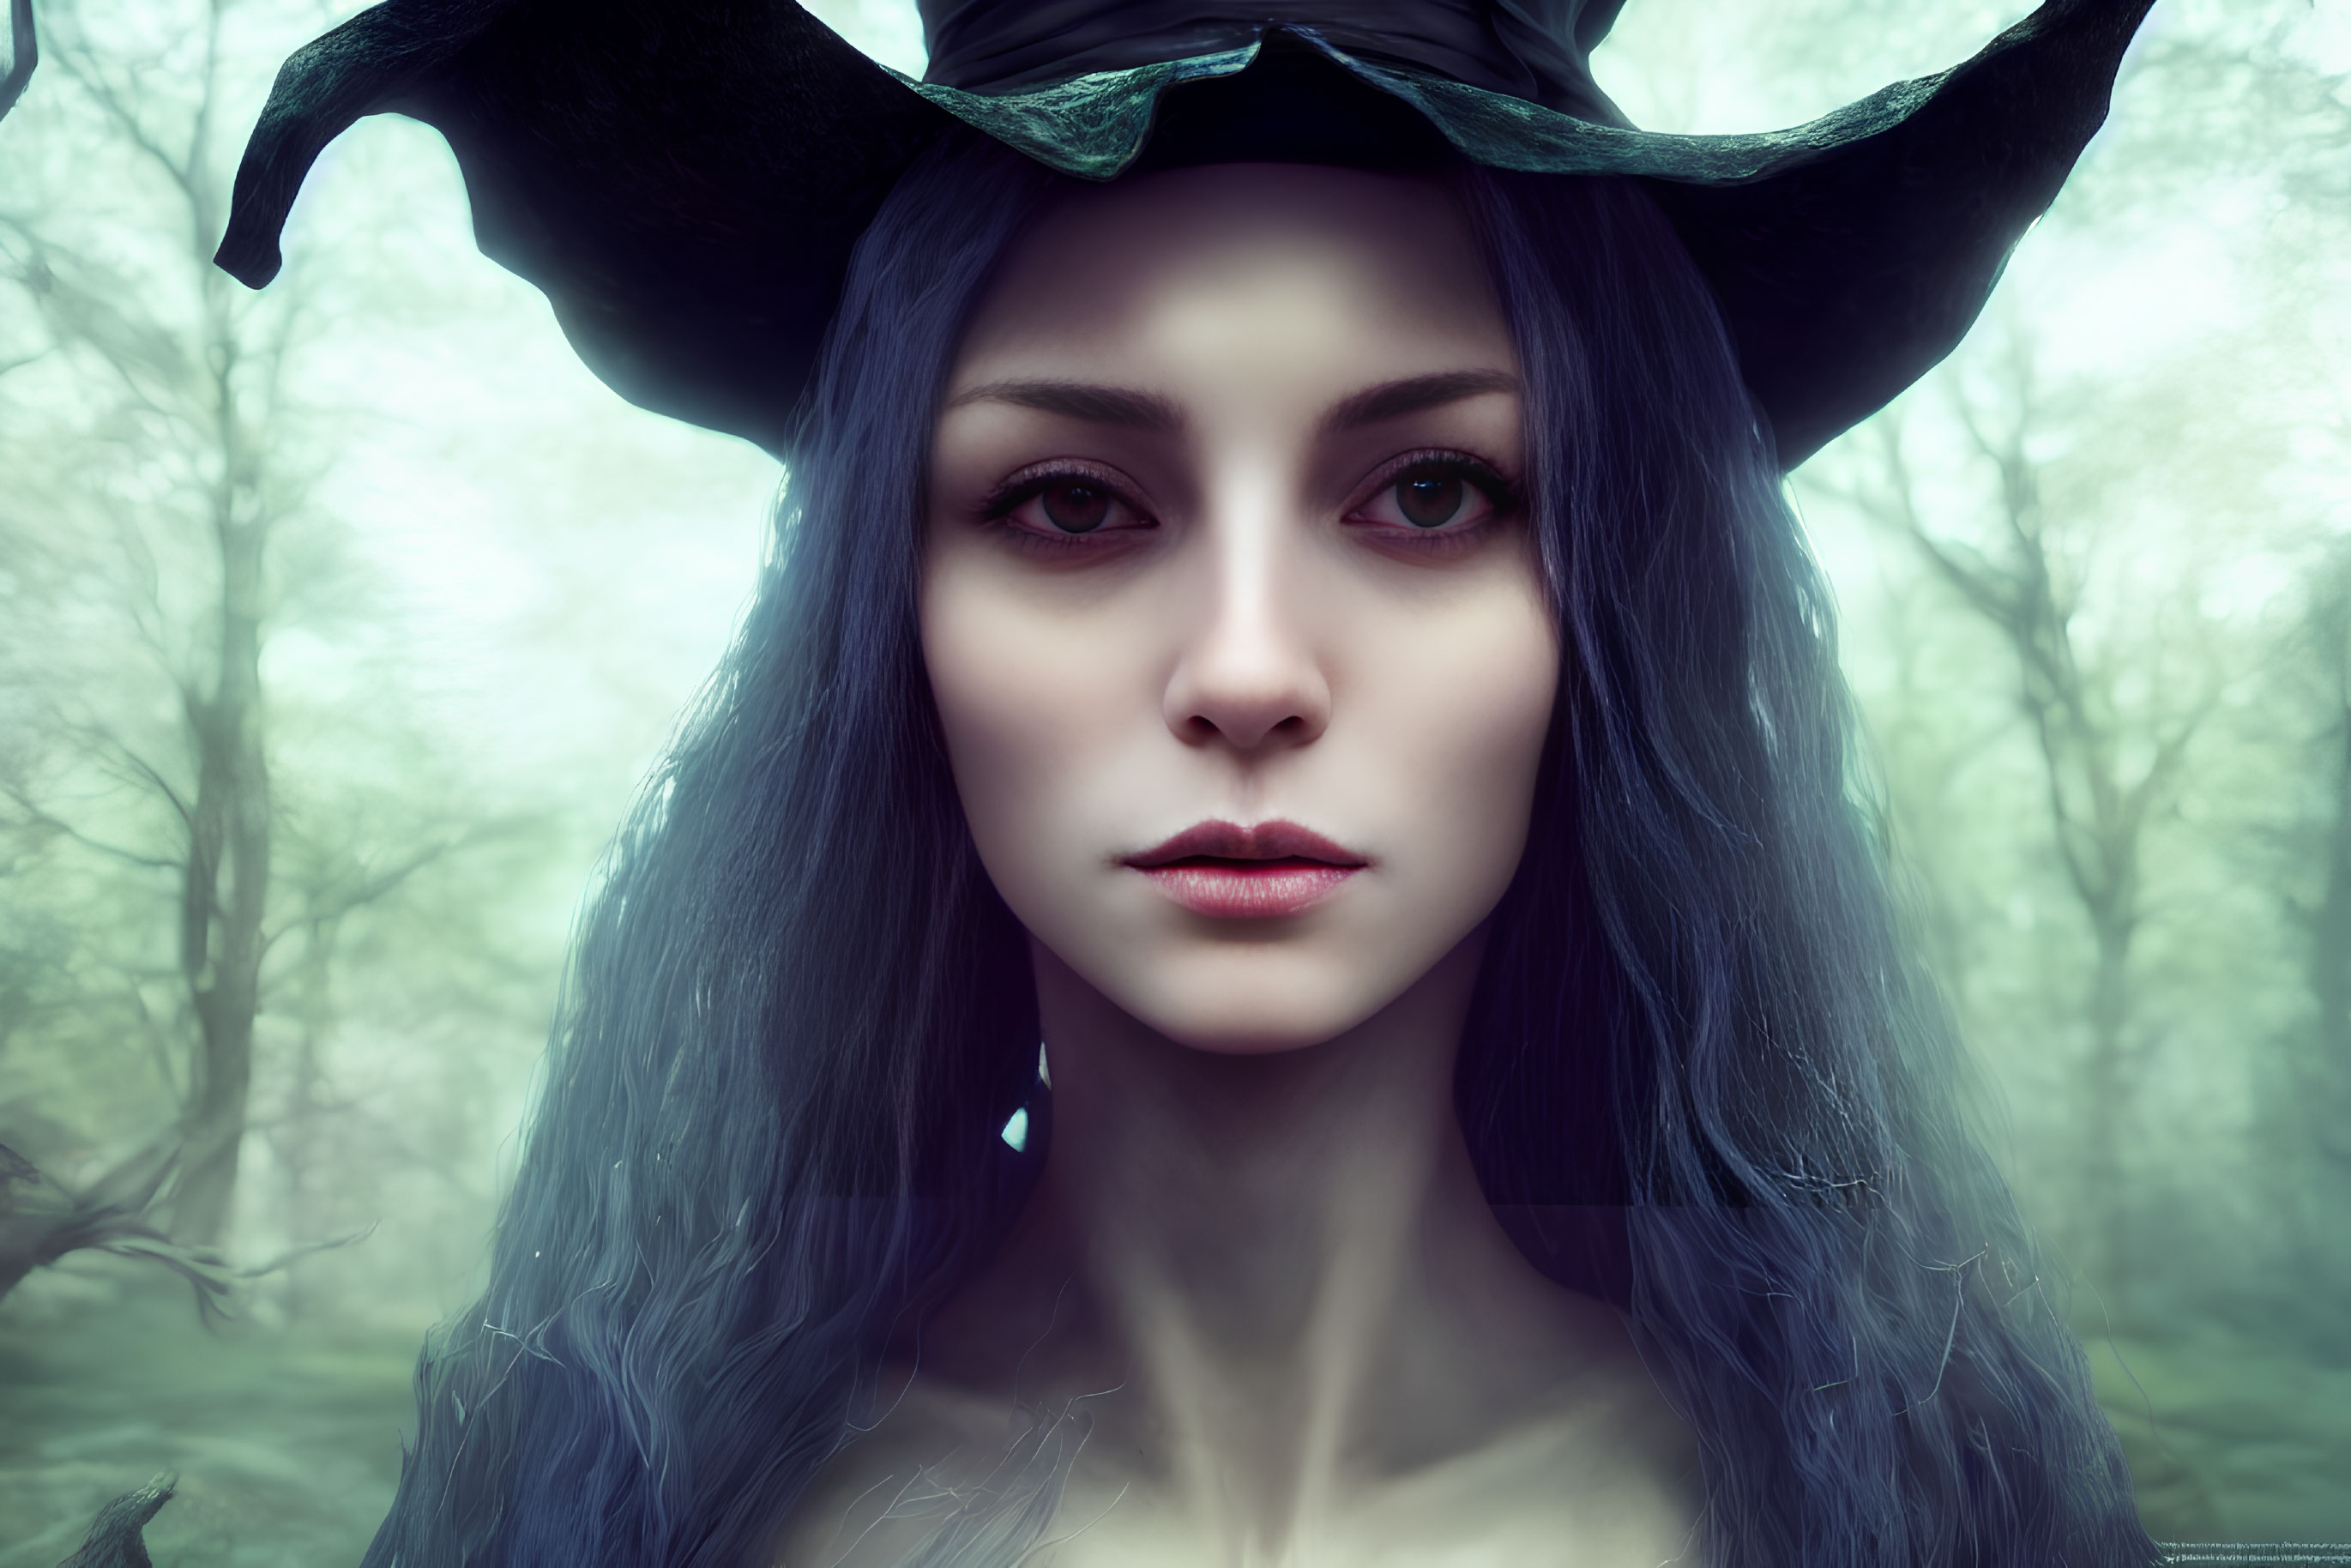 Portrait of woman with blue eyes and horned headdress in misty forest.